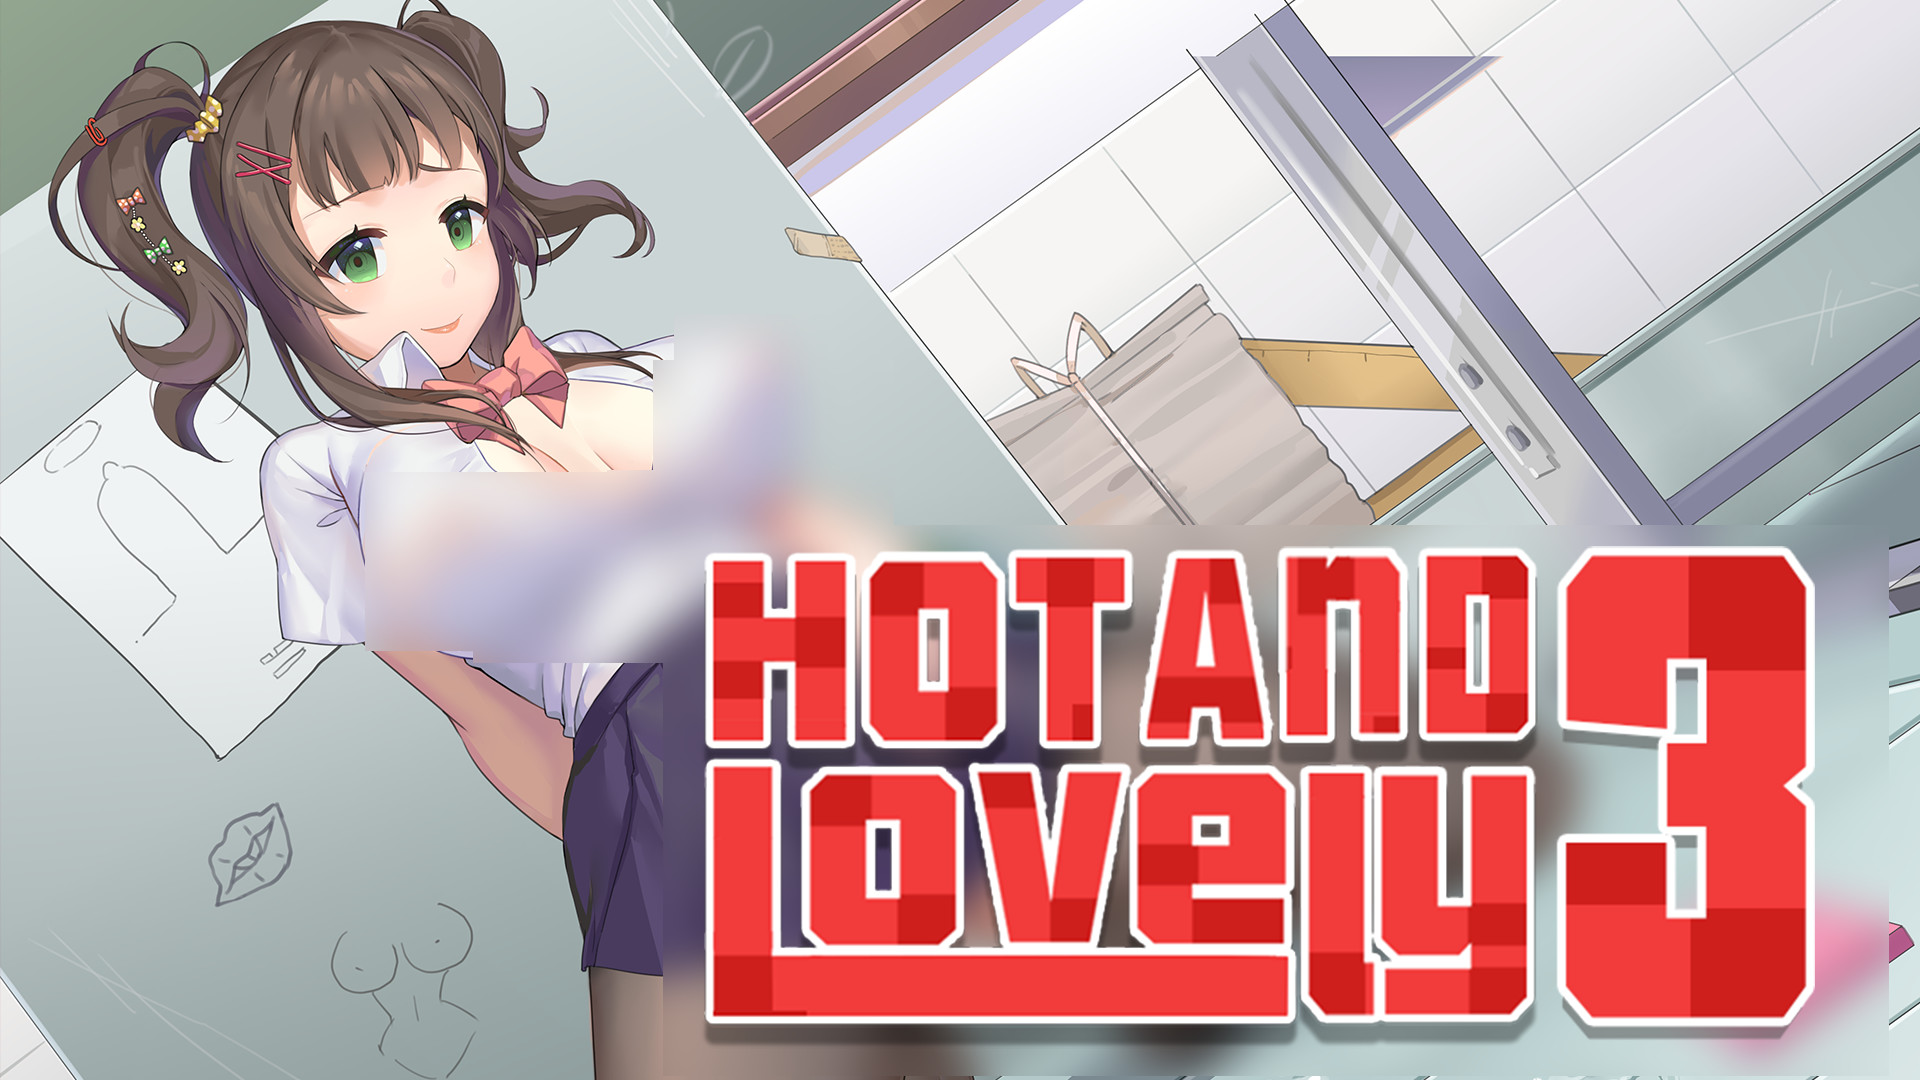 Hot and lovely sugar. Hot and Lovely игра. Цензура в играх. Love & Lies игра. Hot and Lovely ：Charm игра.